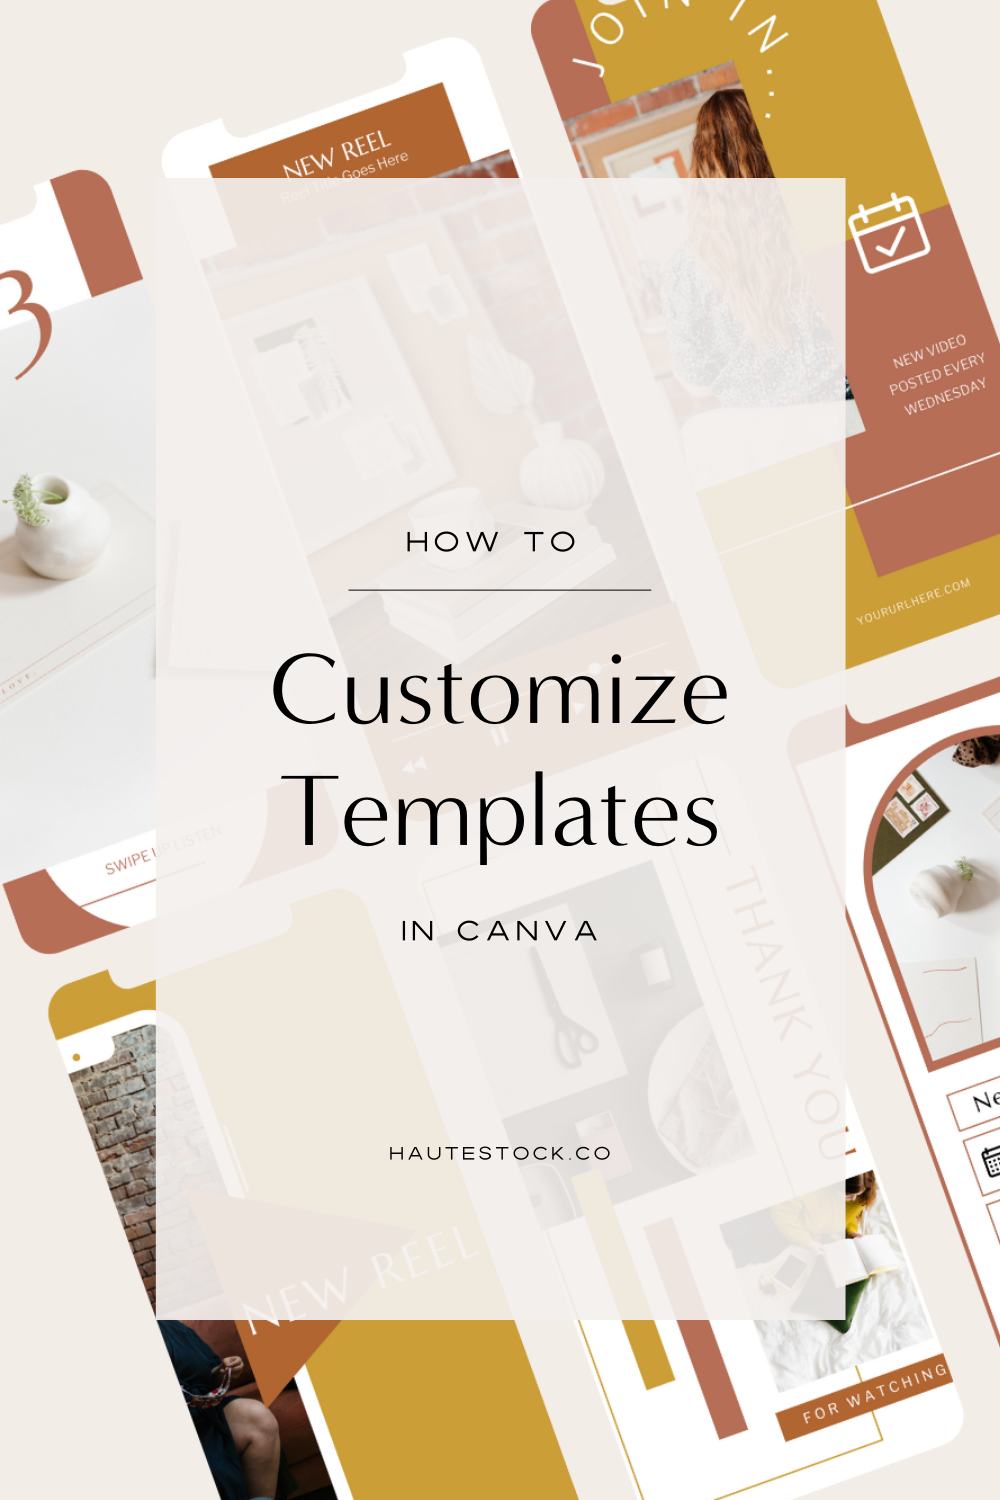 Learn how to customize your templates in Canva for your brand!